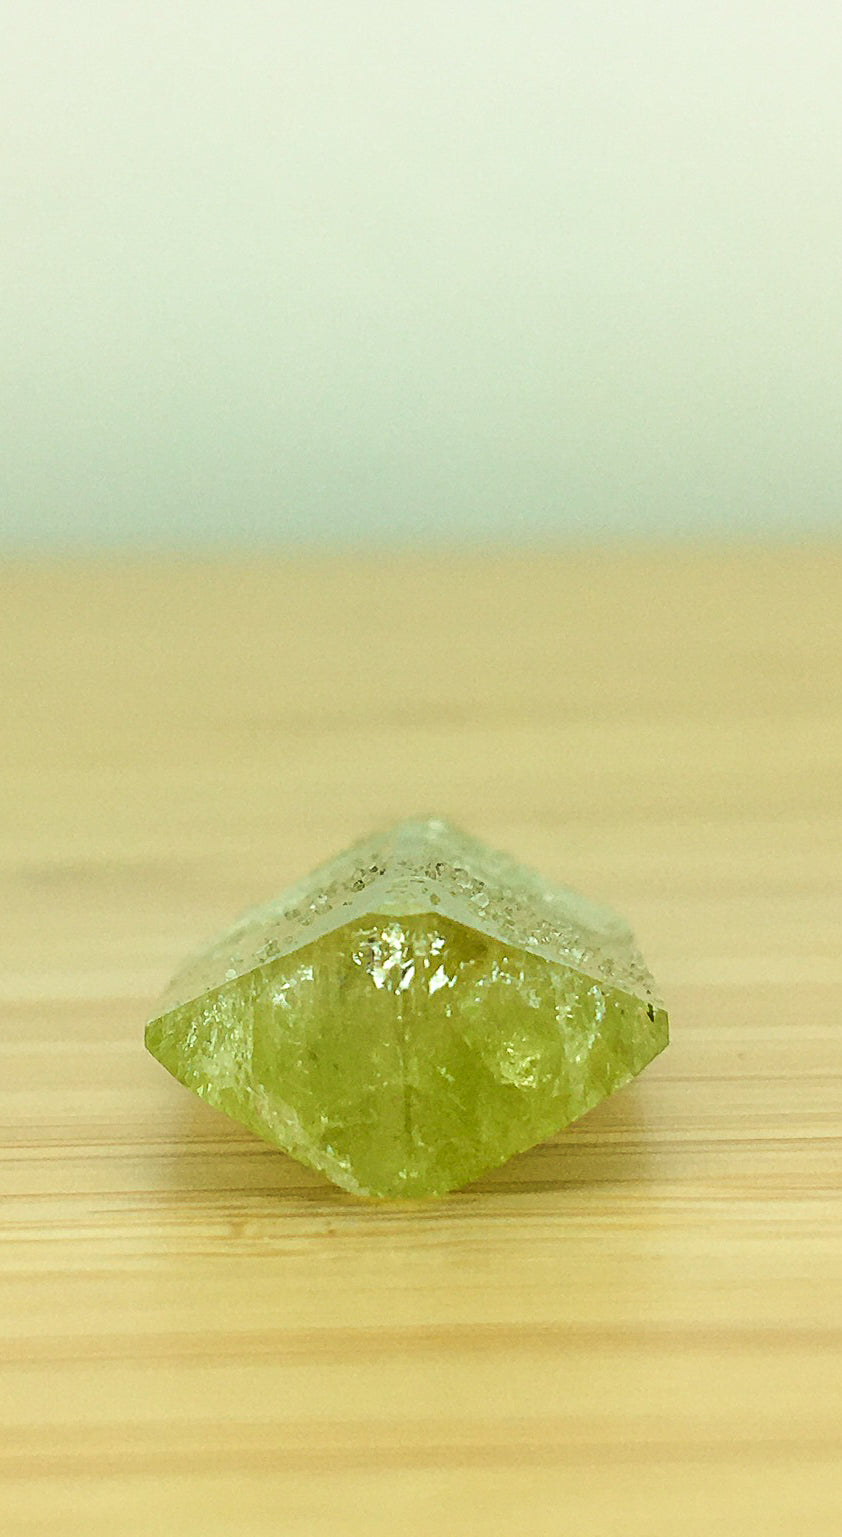 End view of a brazilianite crystal. The end view is tetrahedral